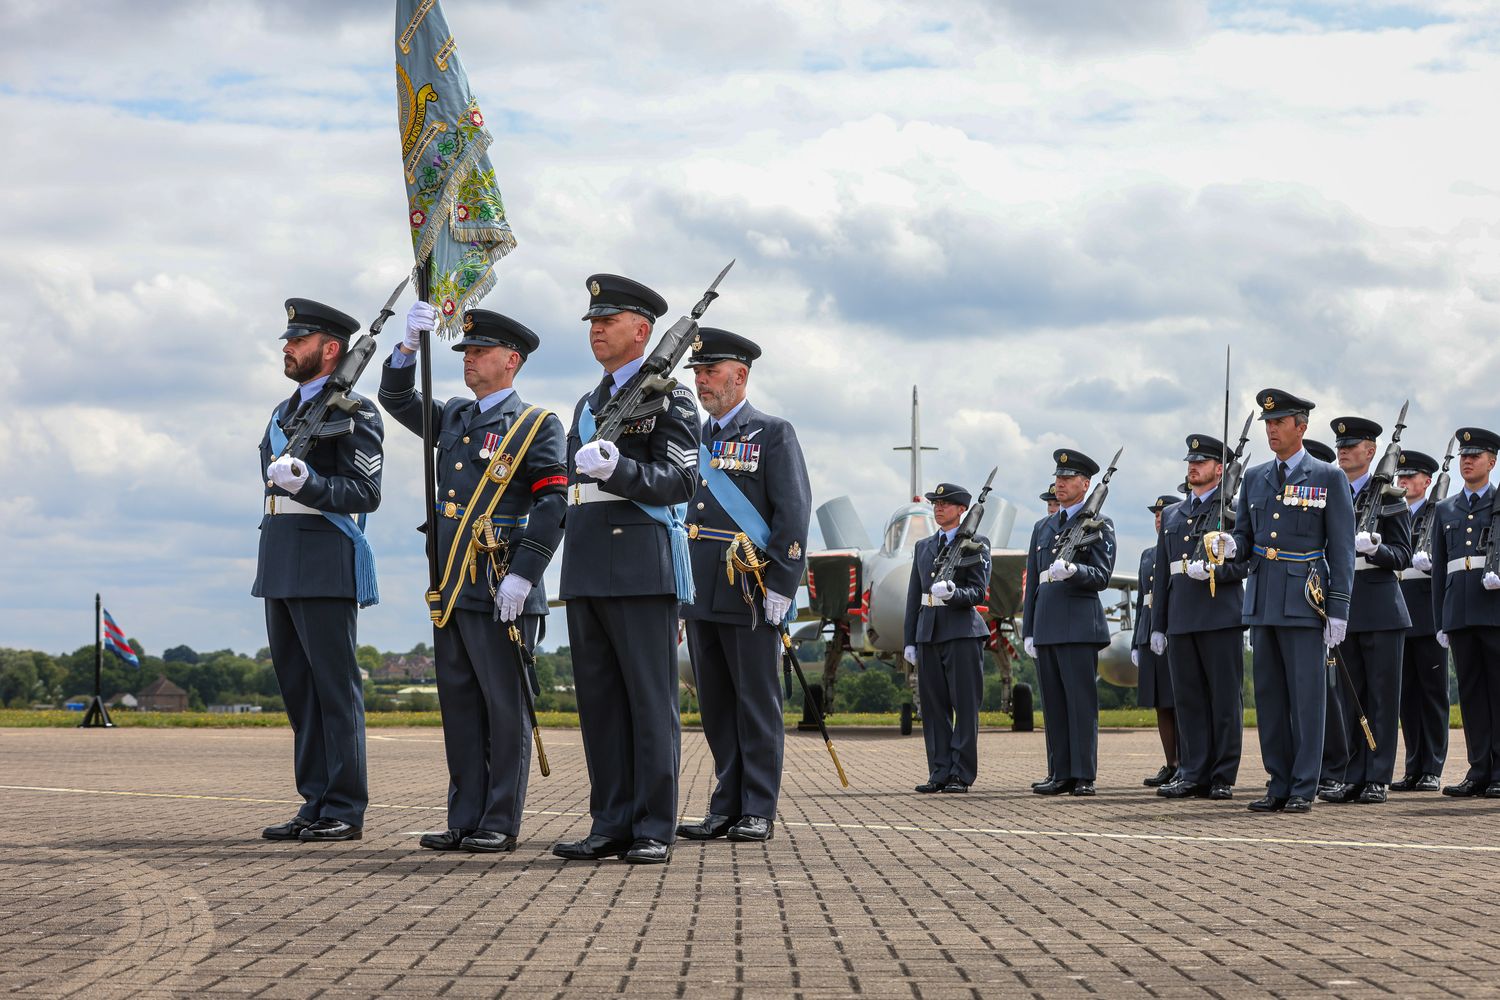 Reservists from 605 Squadron are on parade with their new Standard.